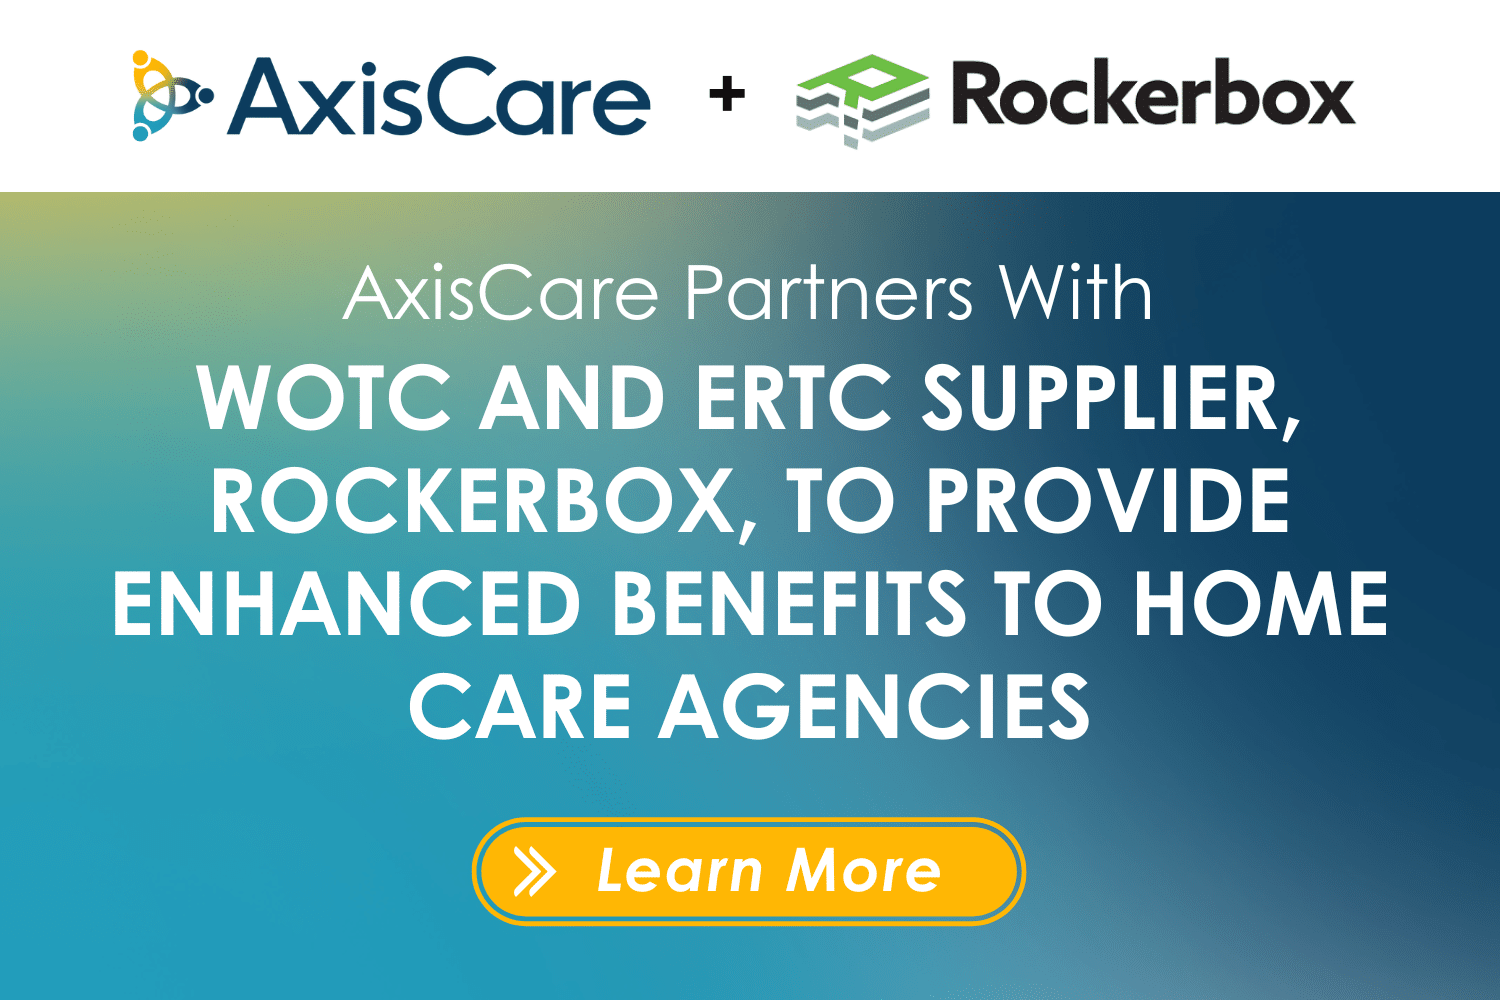 AxisCare Partners With Rockerbox